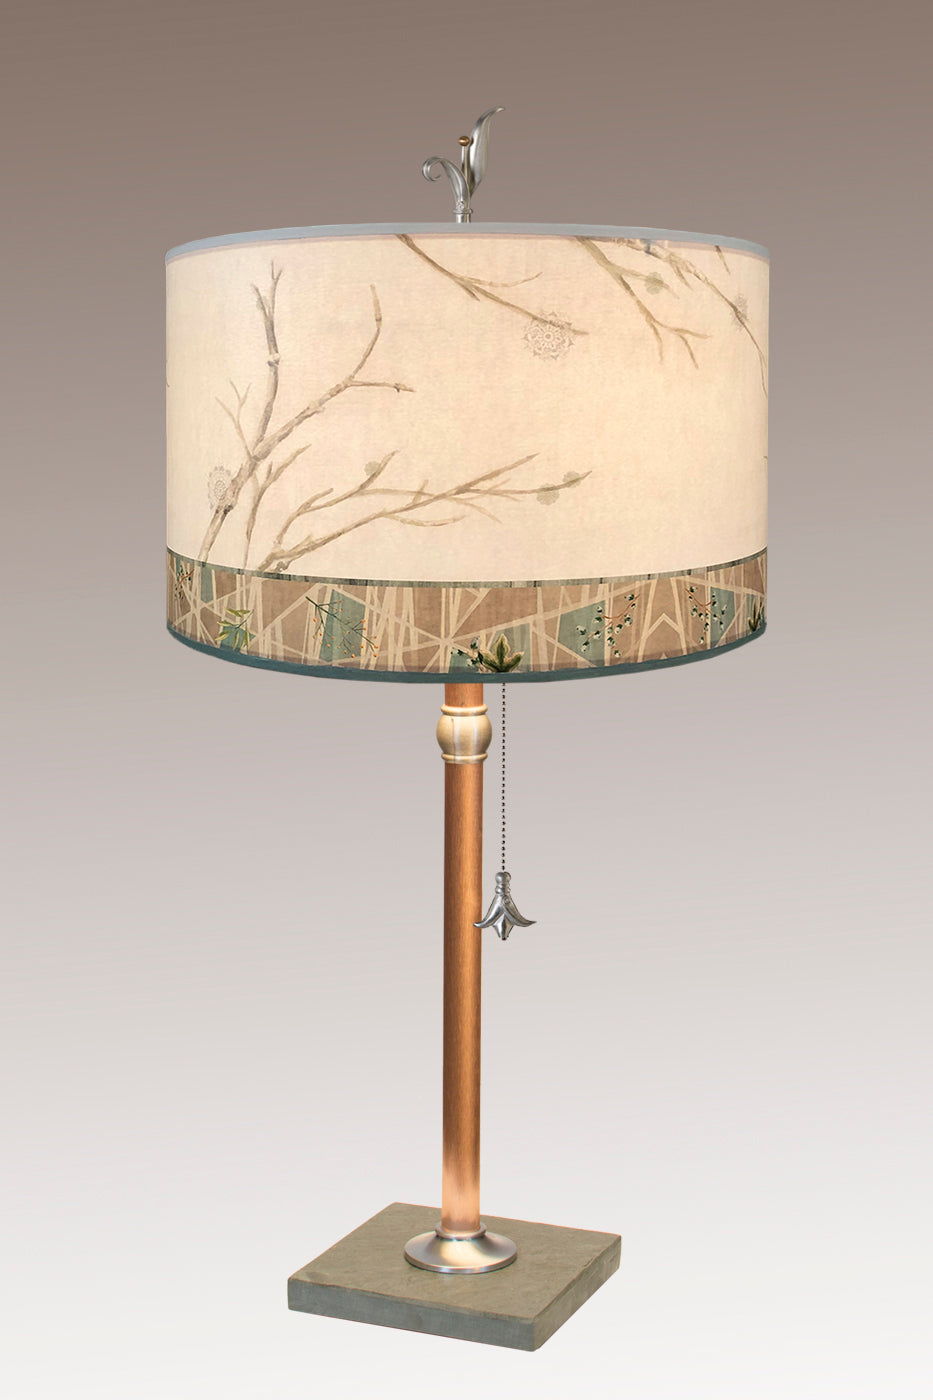 Janna Ugone &amp; Co Table Lamps Copper Table Lamp with Large Drum Shade in Prism Branch